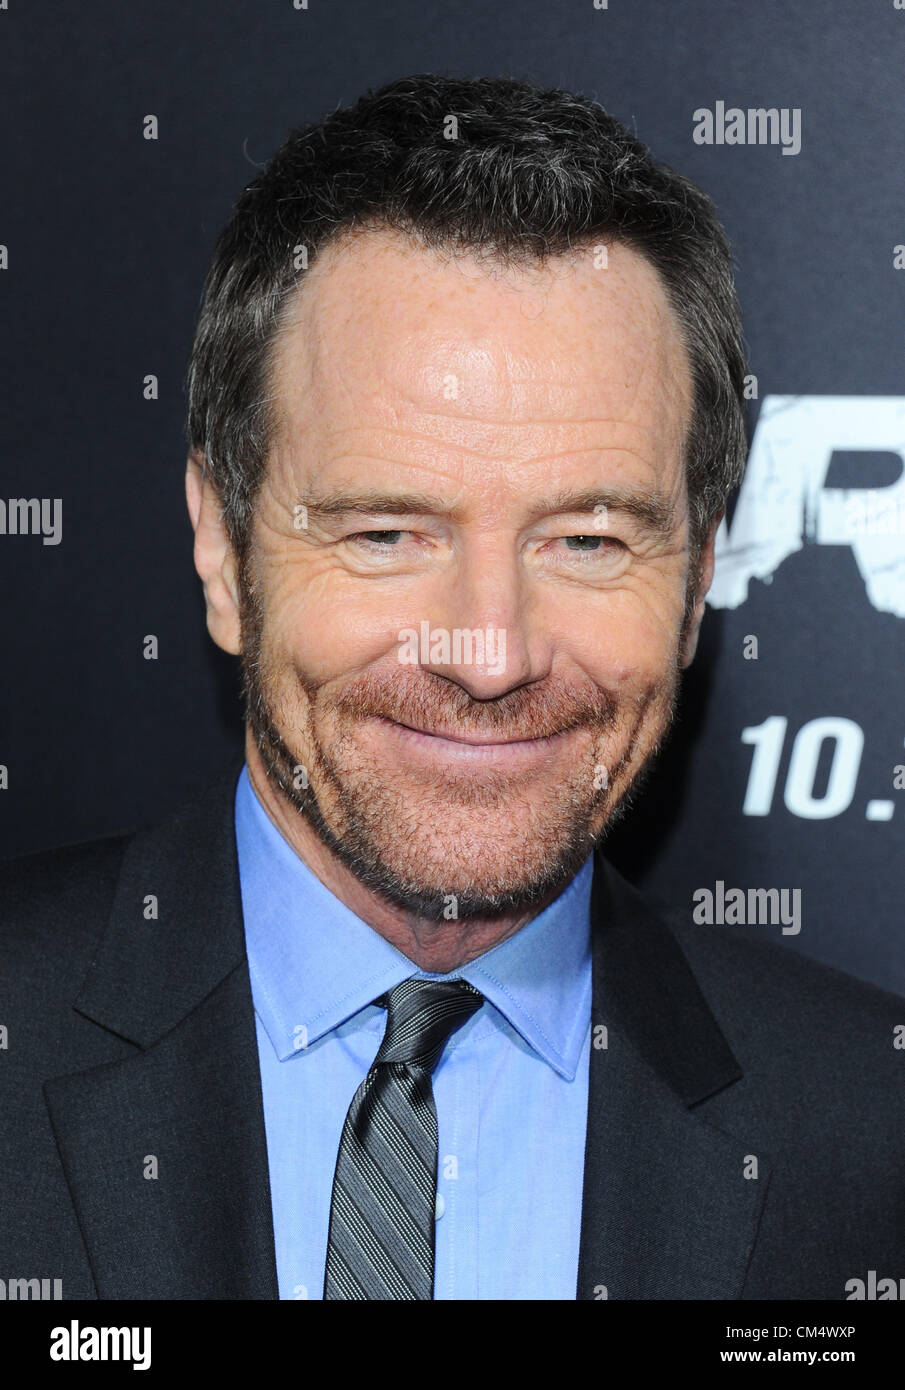 Bryan Cranston at the film premiere for 'Argo' in Beverly Hills, CA Oct 4th 2012. USA. Stock Photo